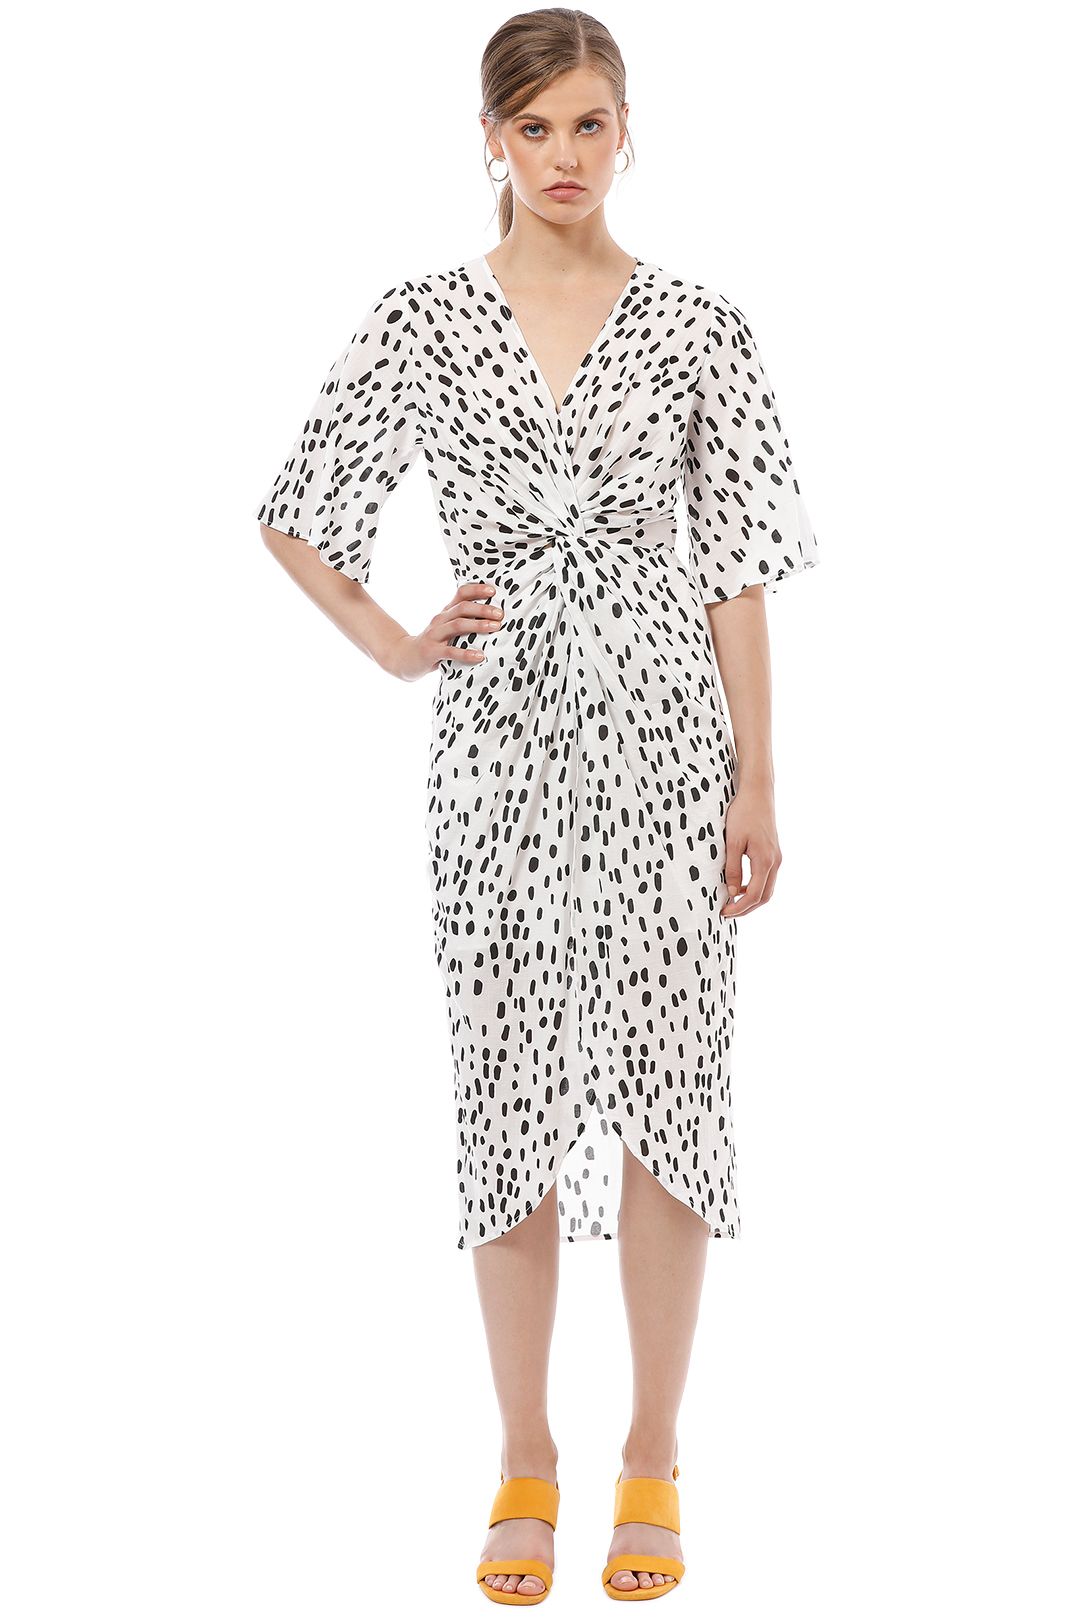 Lucie Polka Dot Wrap Dress By Friend Of Audrey For Hire 